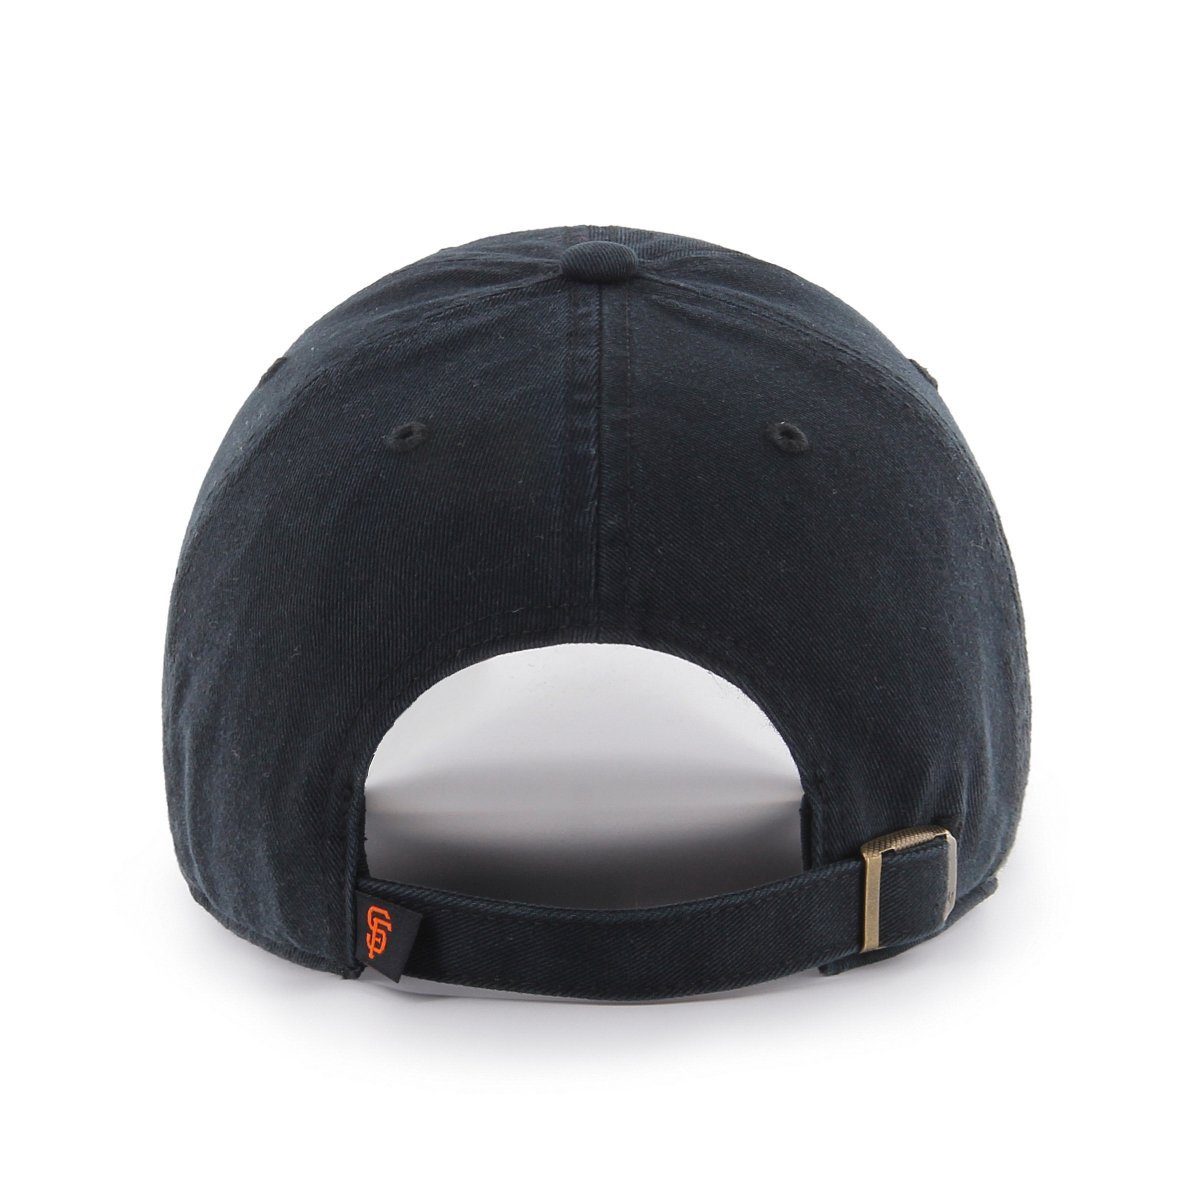 Trucker Francisco MLB San Brand Giants Cap Relaxed Fit '47